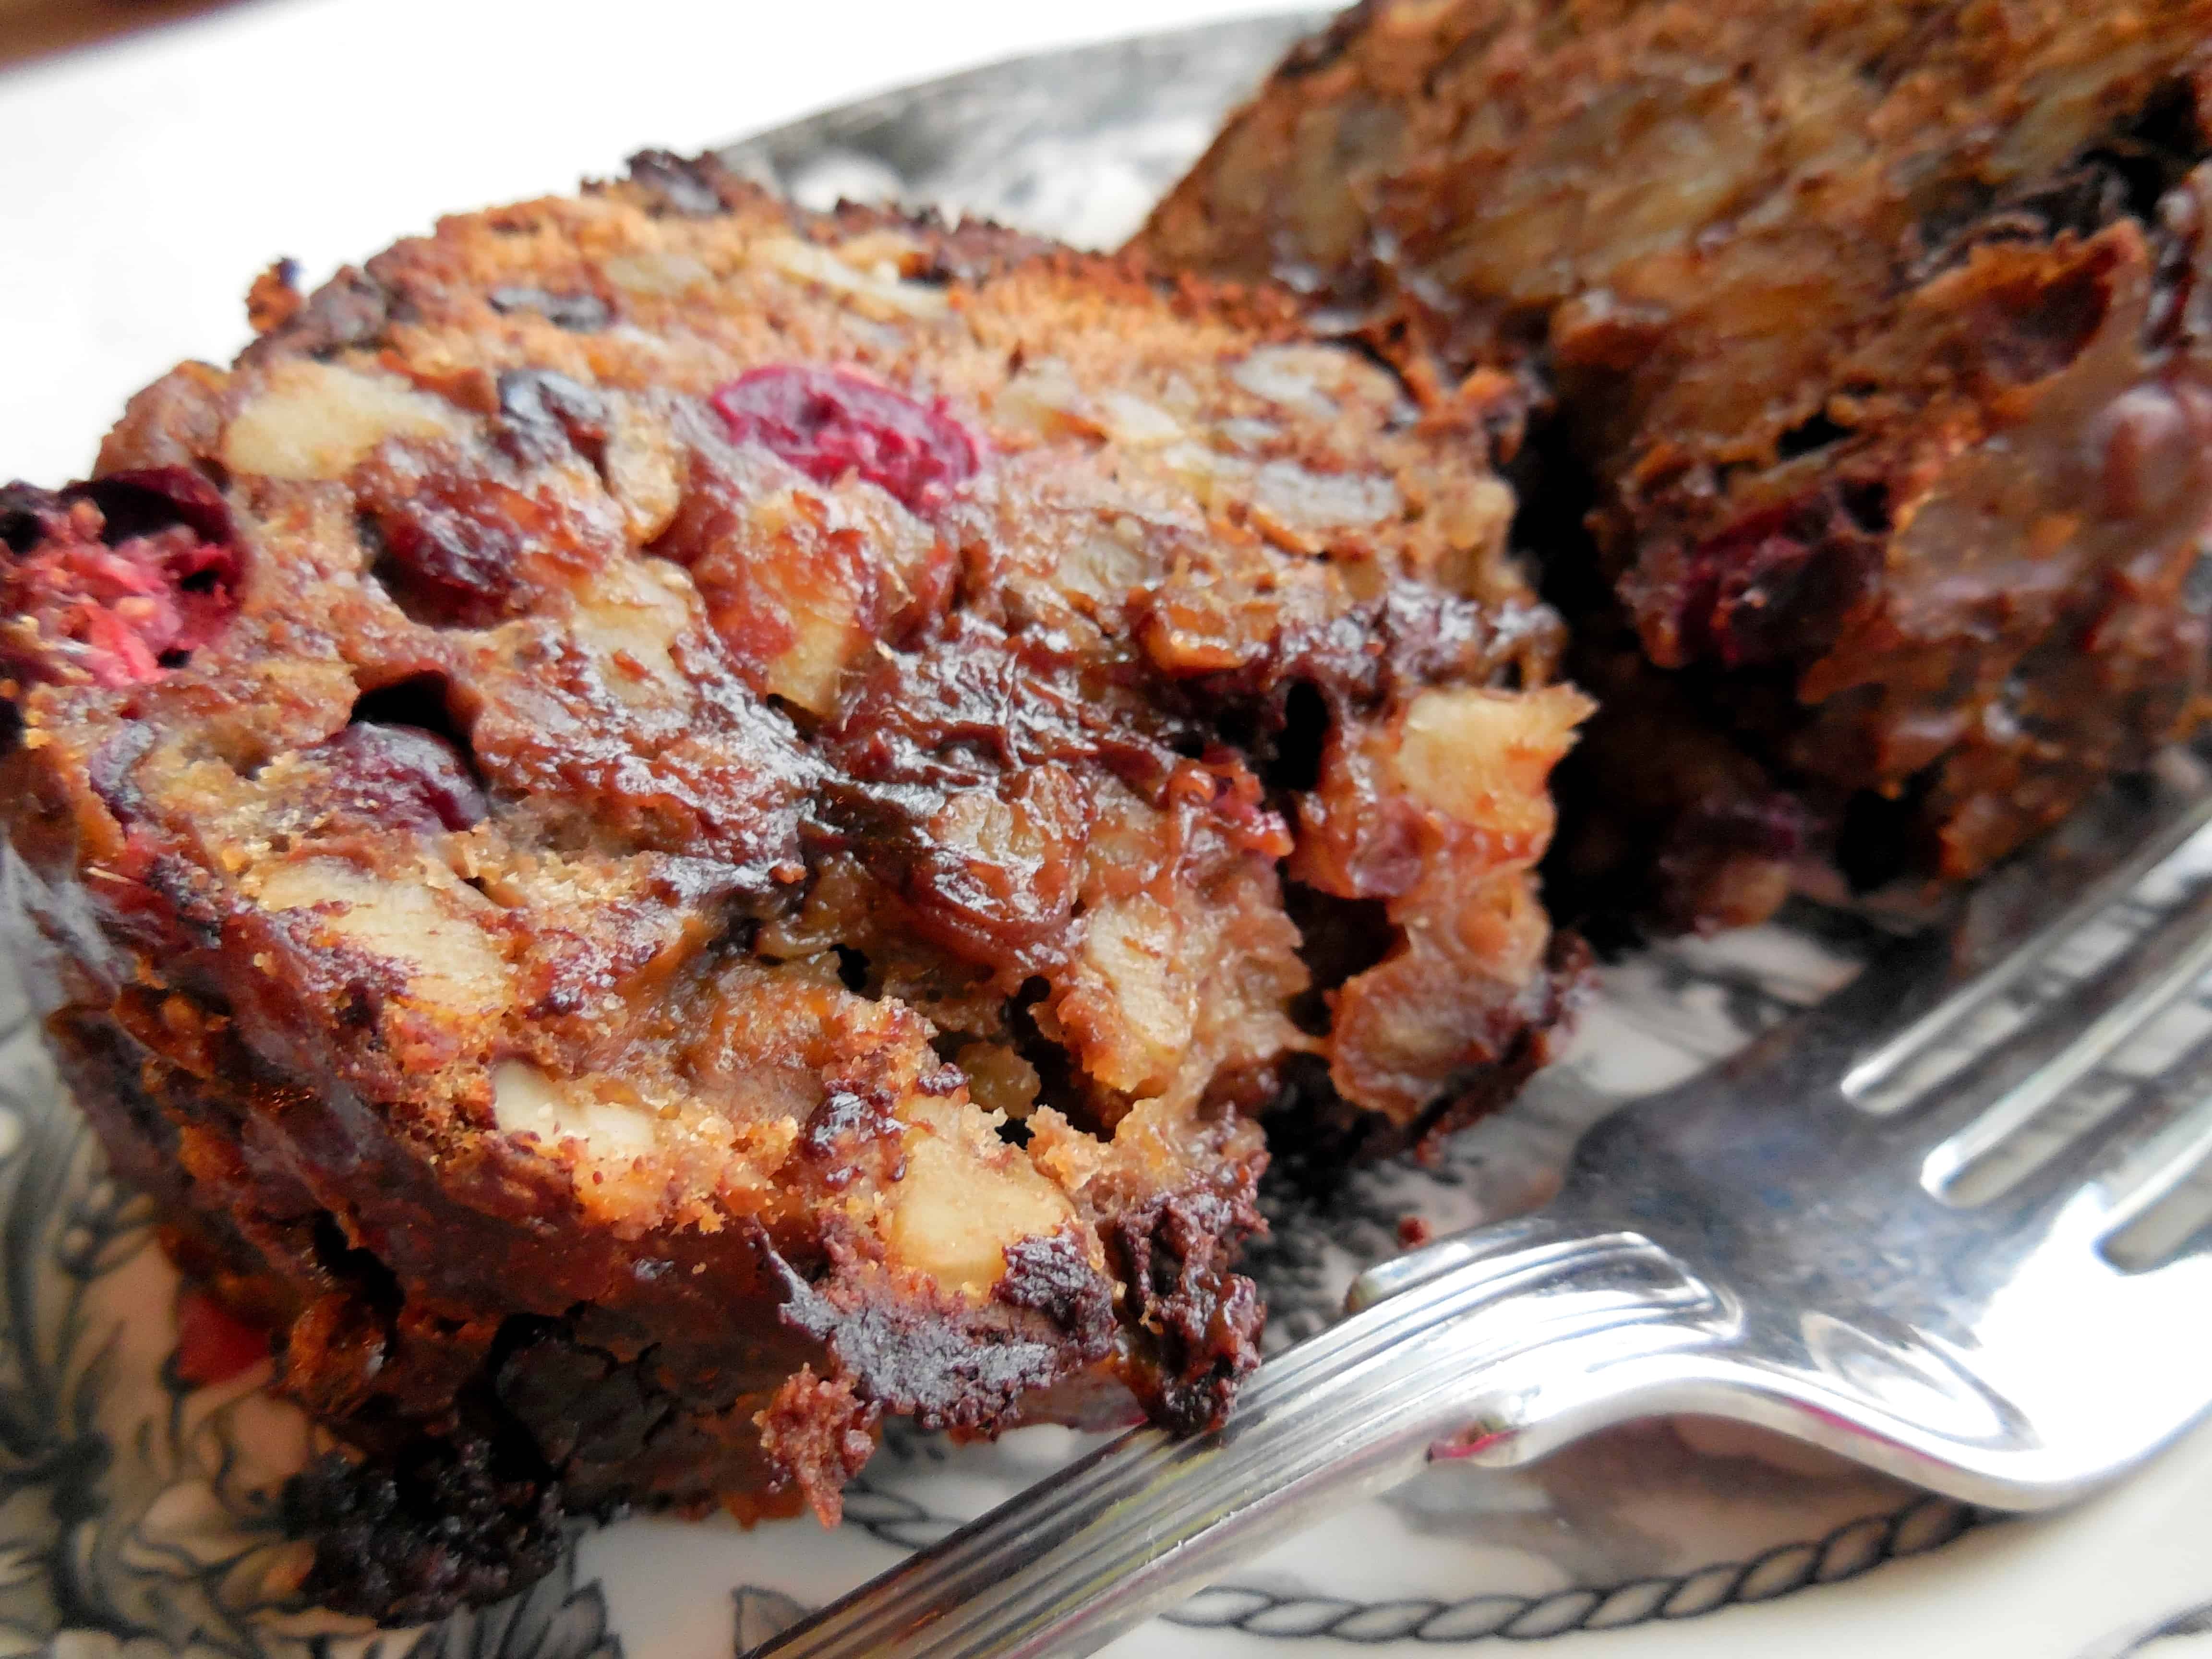 Festive Chocolate Cranberry Bishop's Bread. A dessert bread with cranberries, dates, walnuts, chocolate, and rum. 